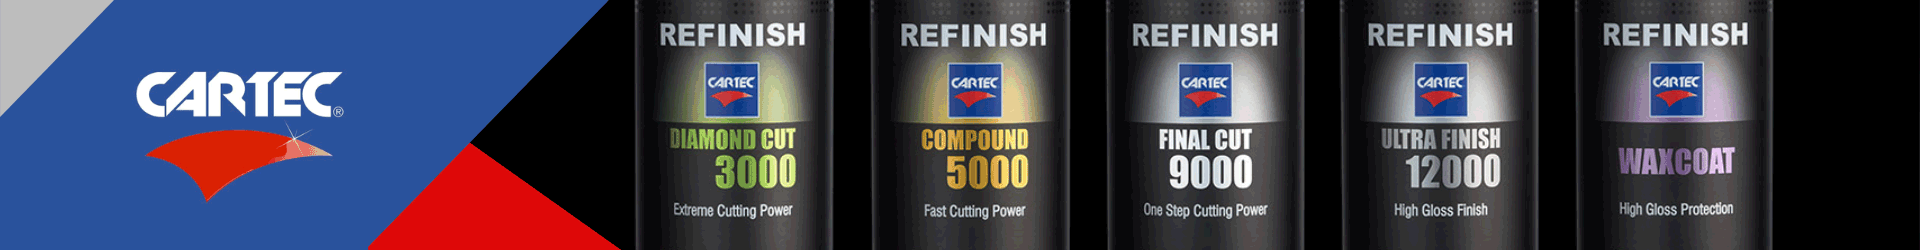 Cartec Refinish Compounds and Polishes